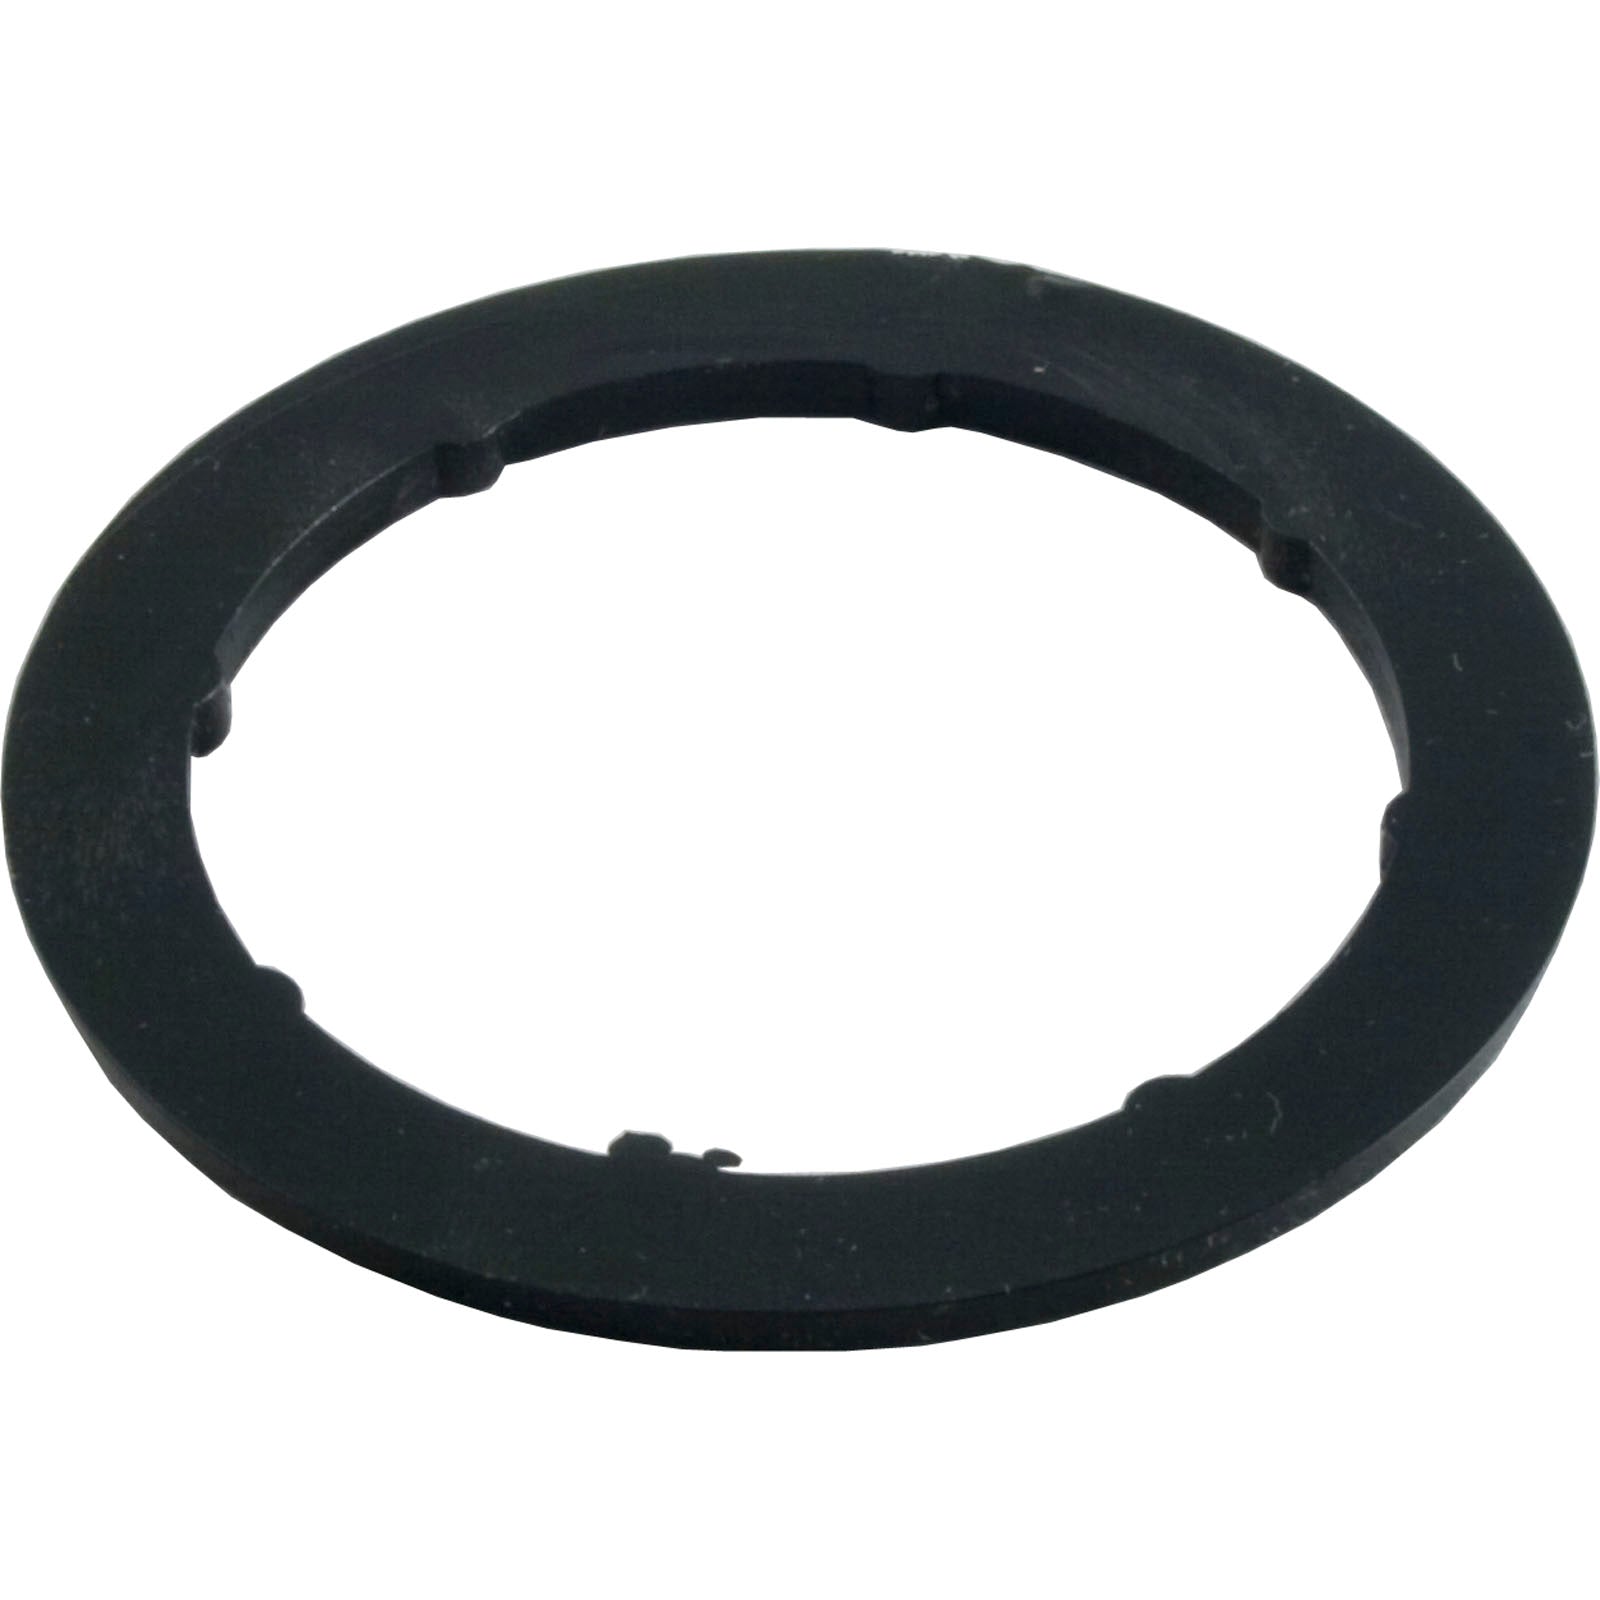 Spacer, Waterway In-Line/Top-Load/Dyna-Flo/Flo-Pro/Top Mount/ 711-1010